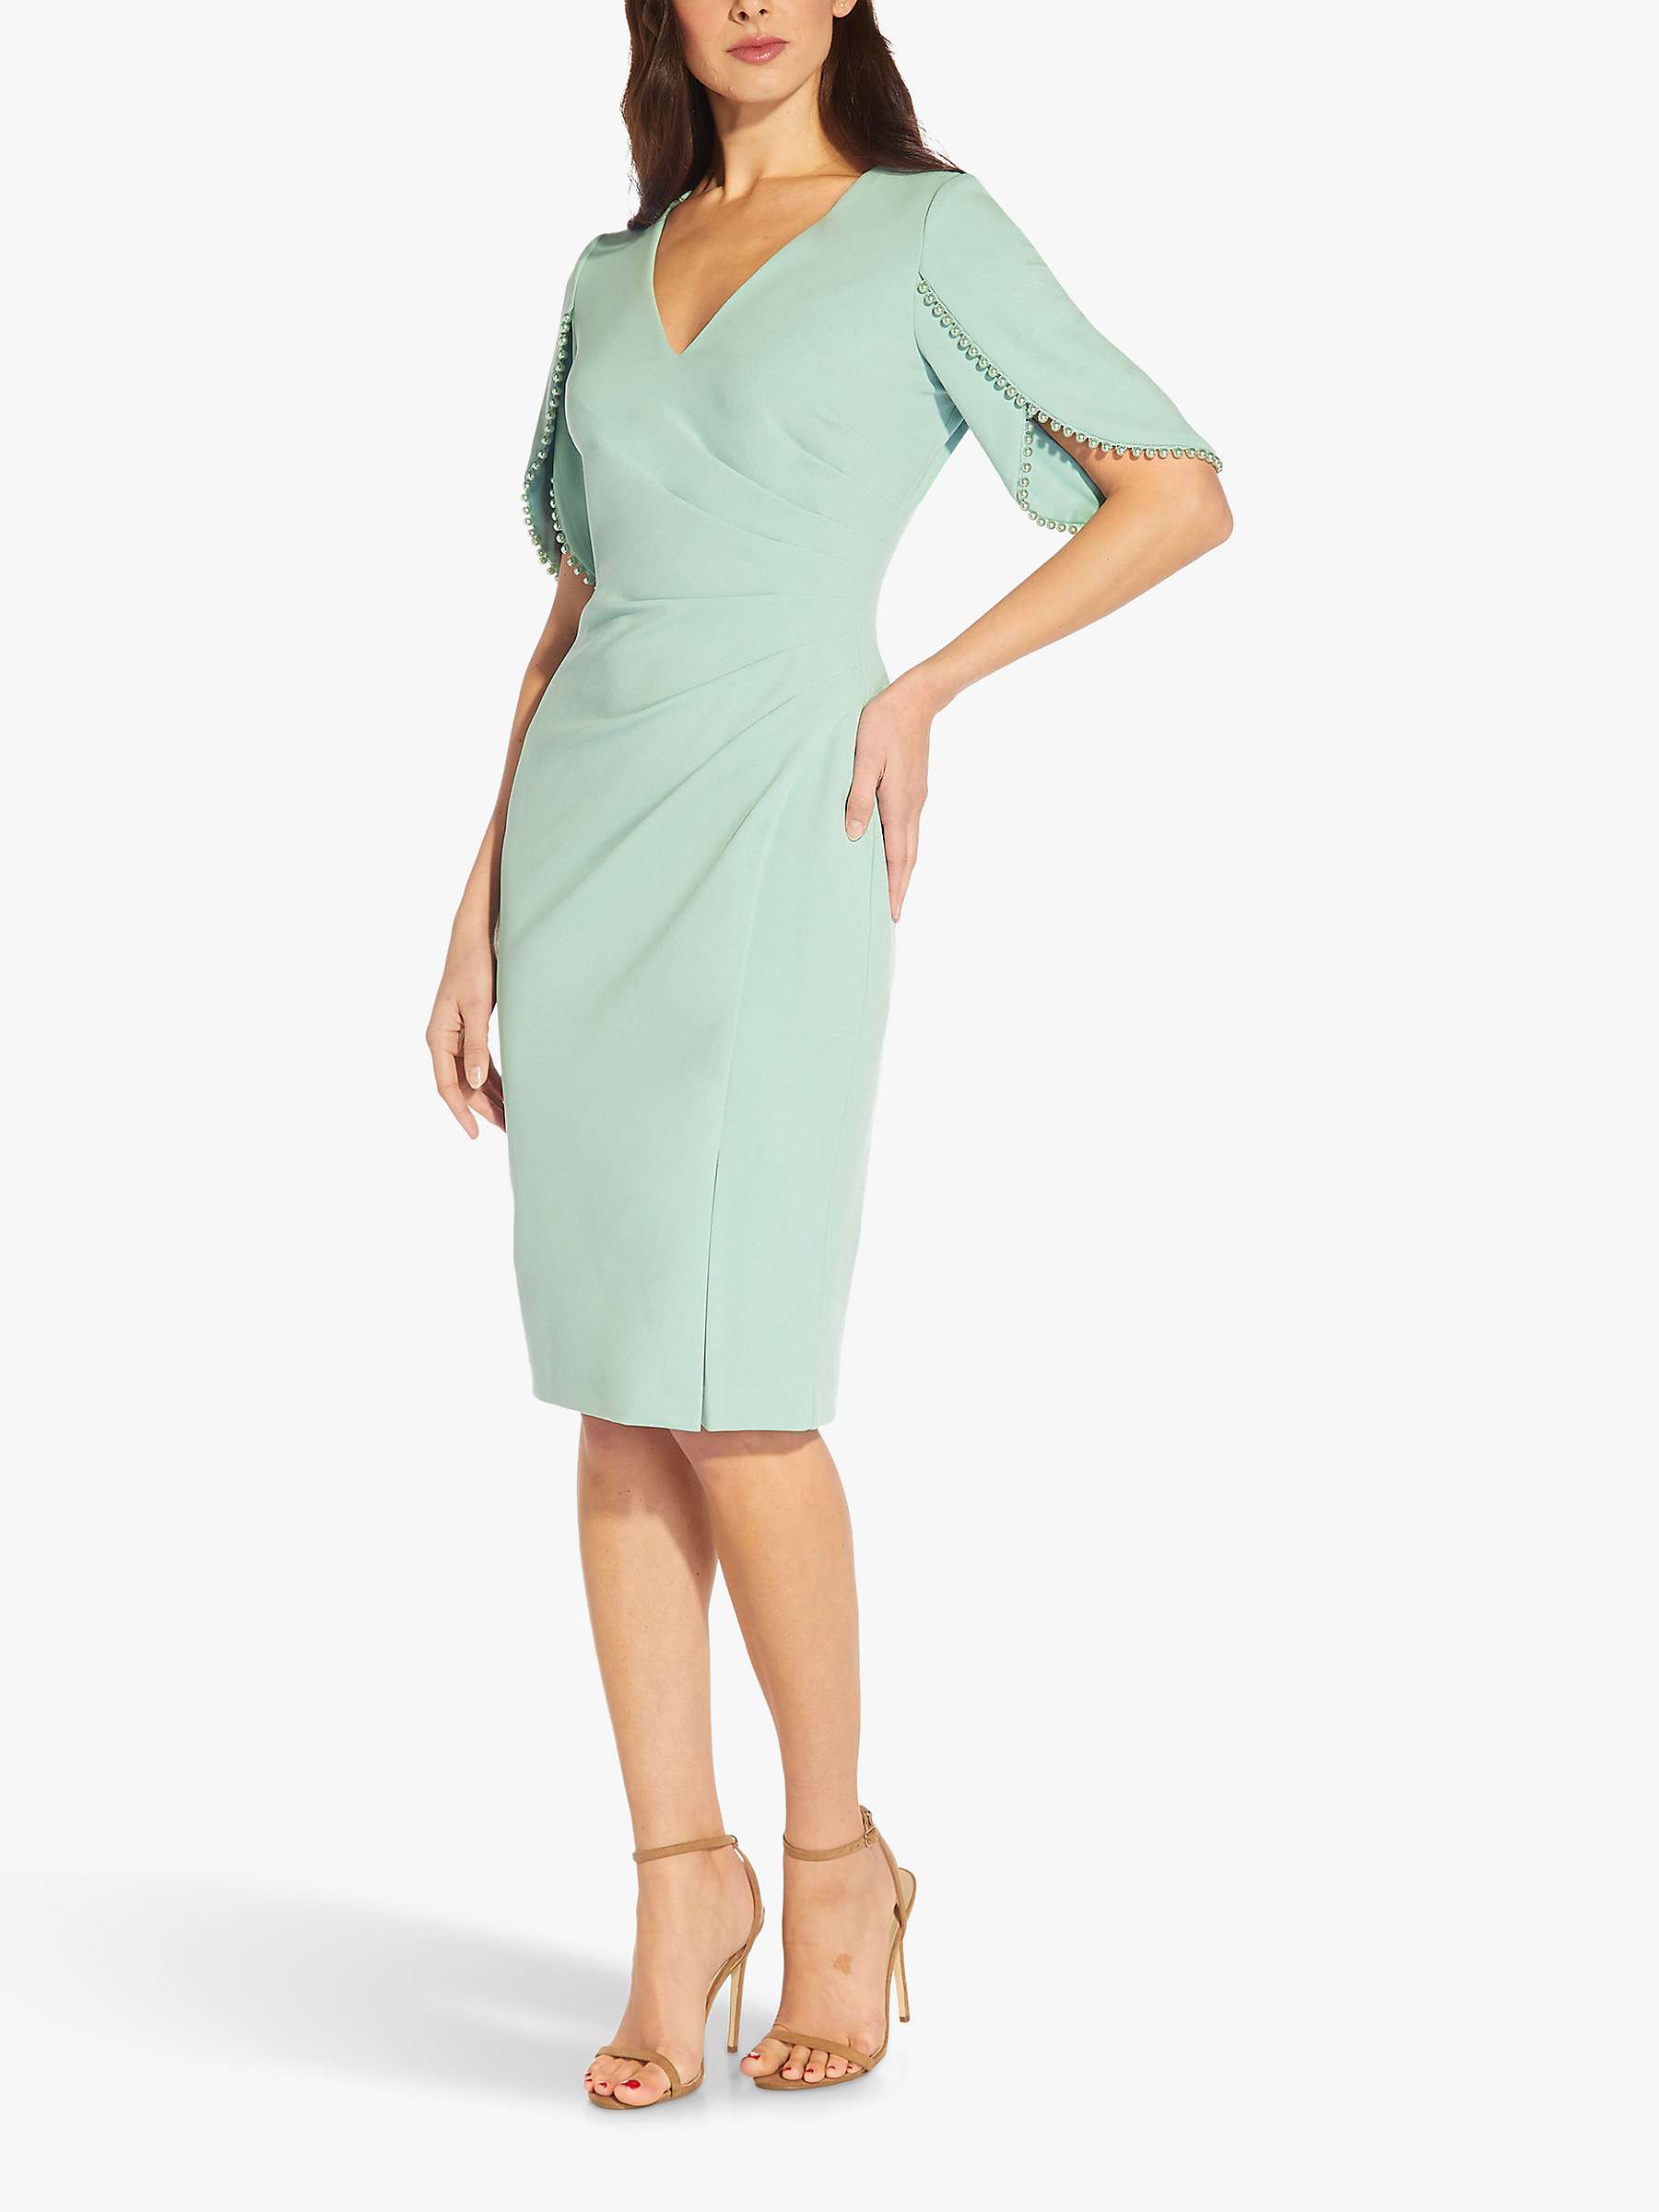 Buy Adrianna Papell Knit Crepe Pearl Dress, Cloudy Aqua Online at johnlewis.com